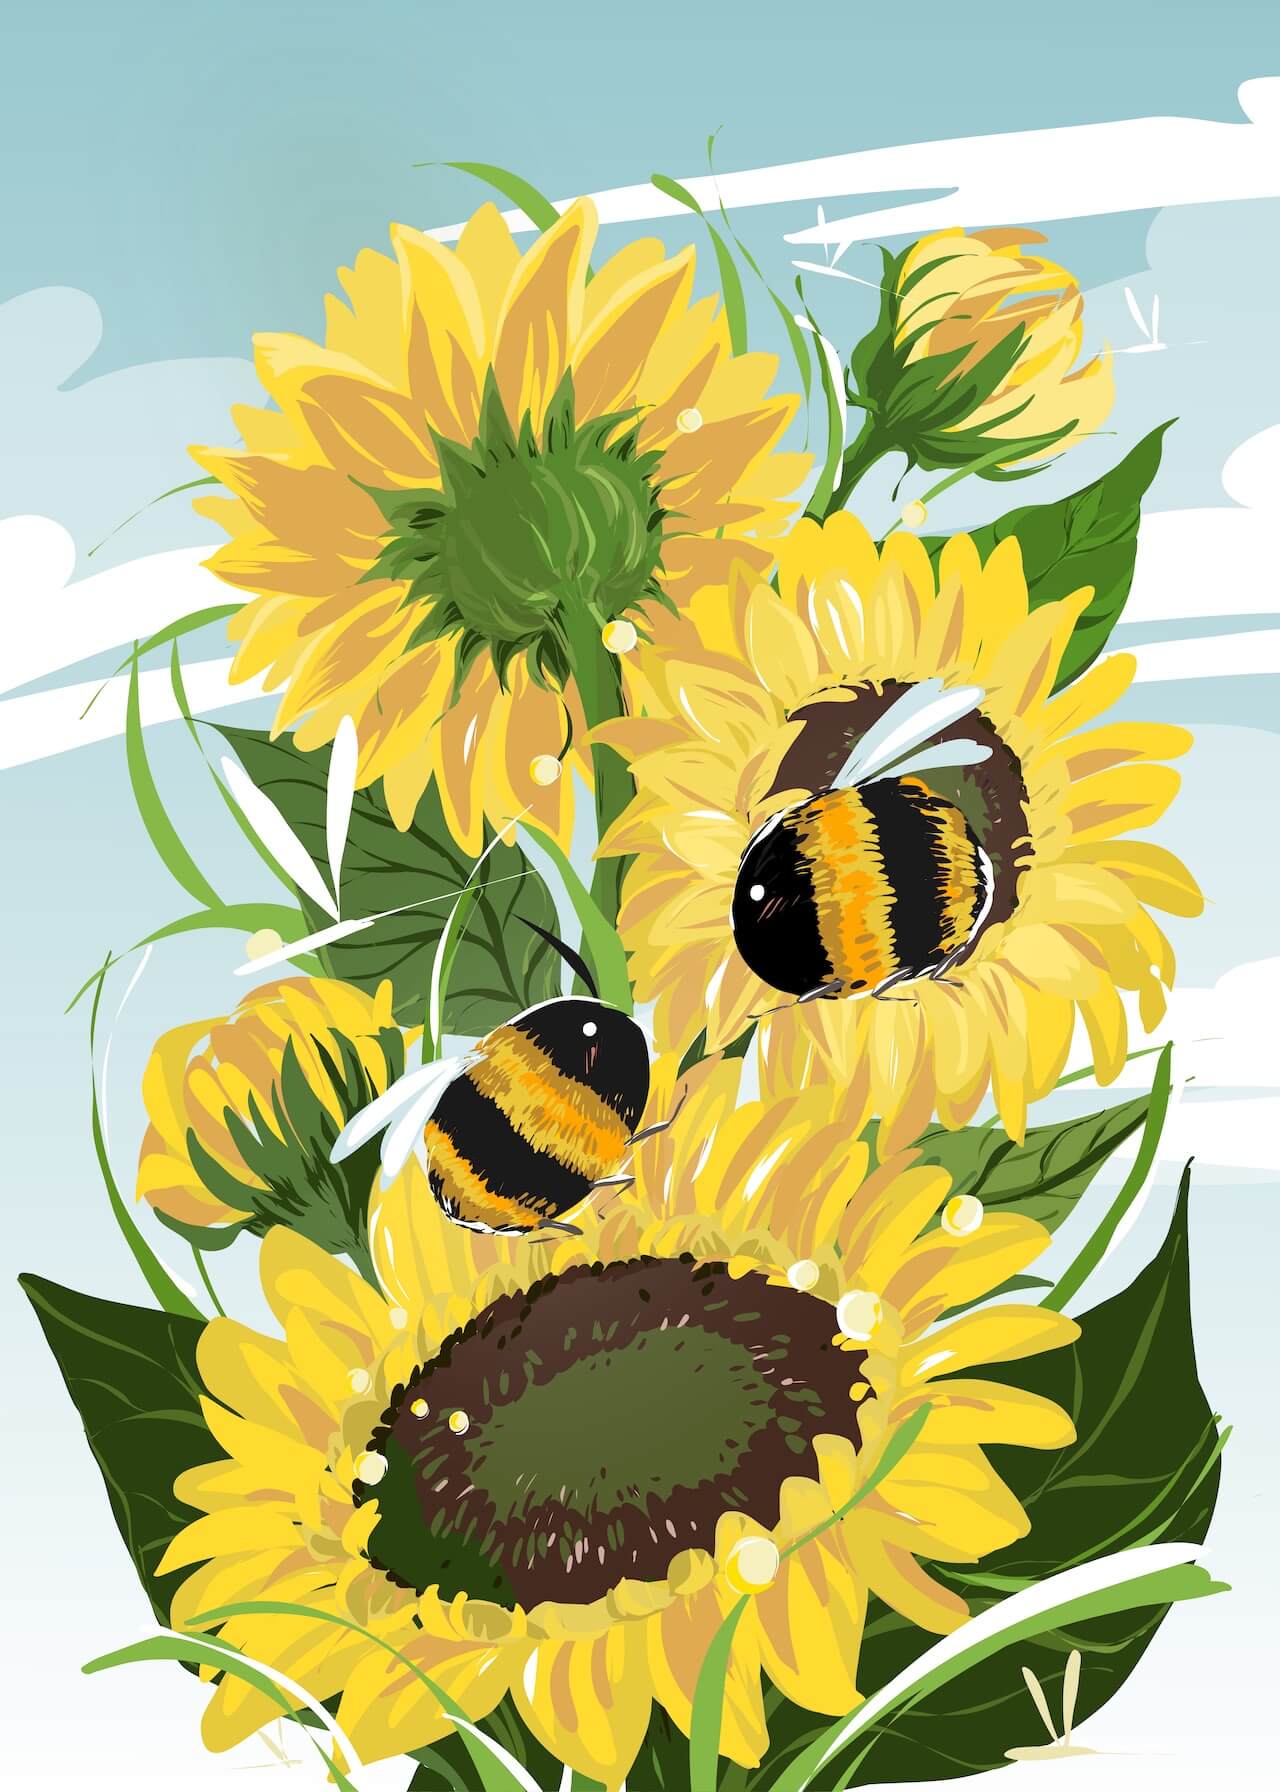 Bright sunflowers with bees on a light blue sky background